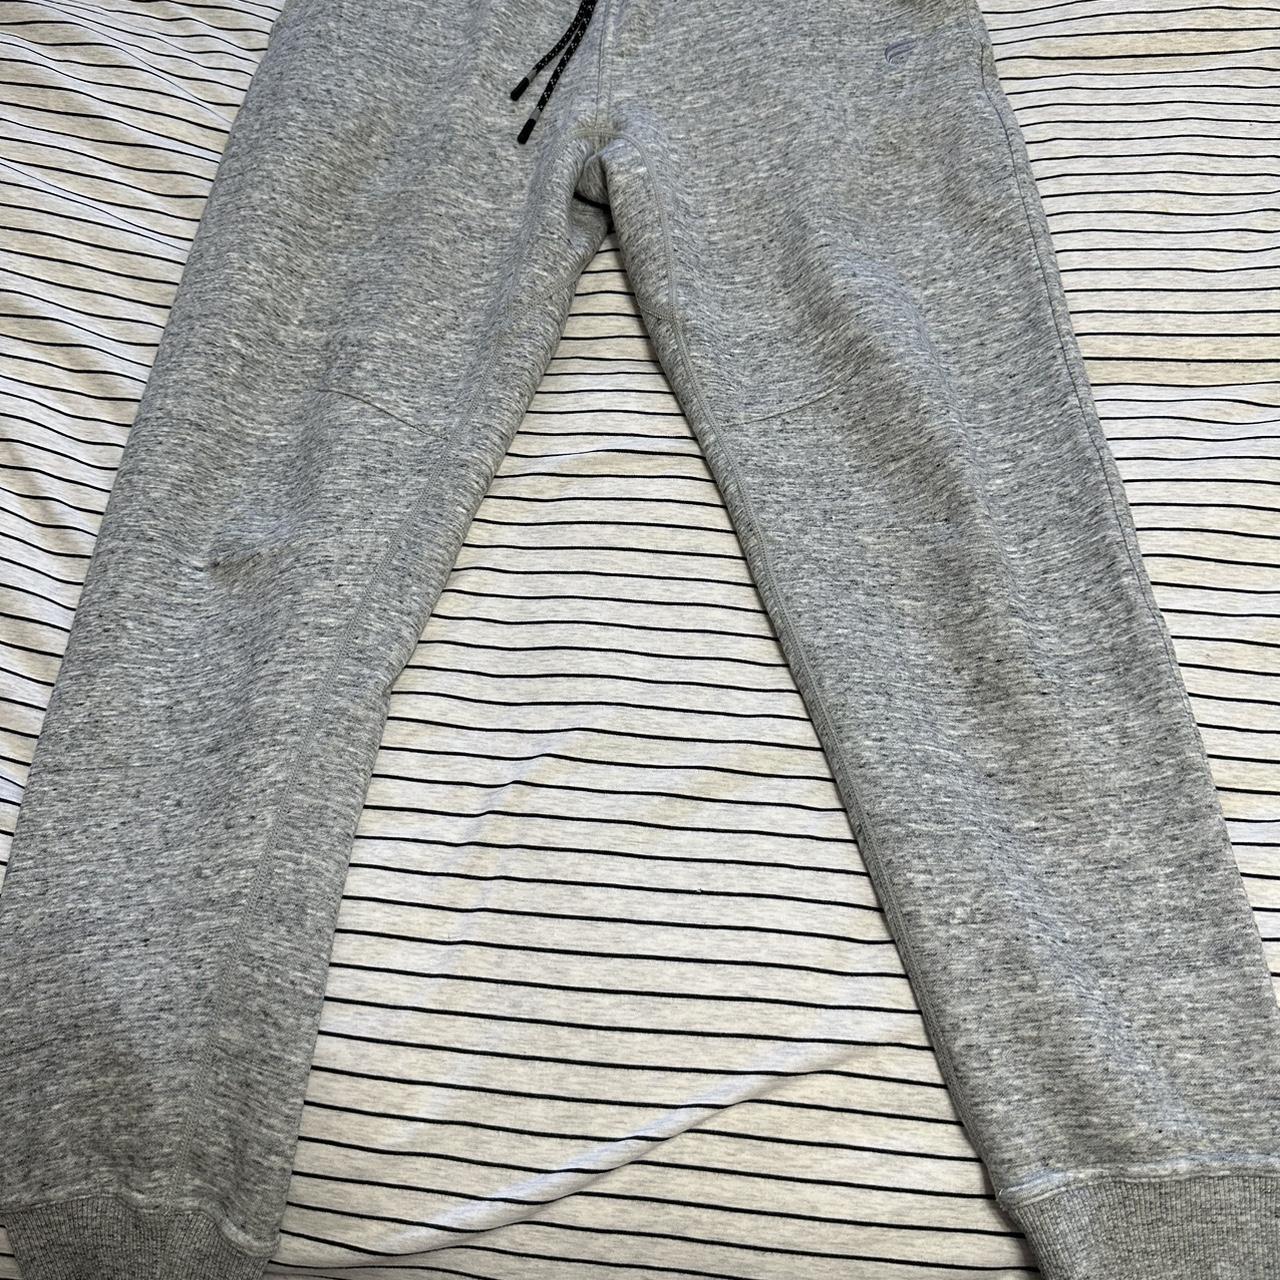 Fabletics Go-To Classic jogger in large. The pants - Depop